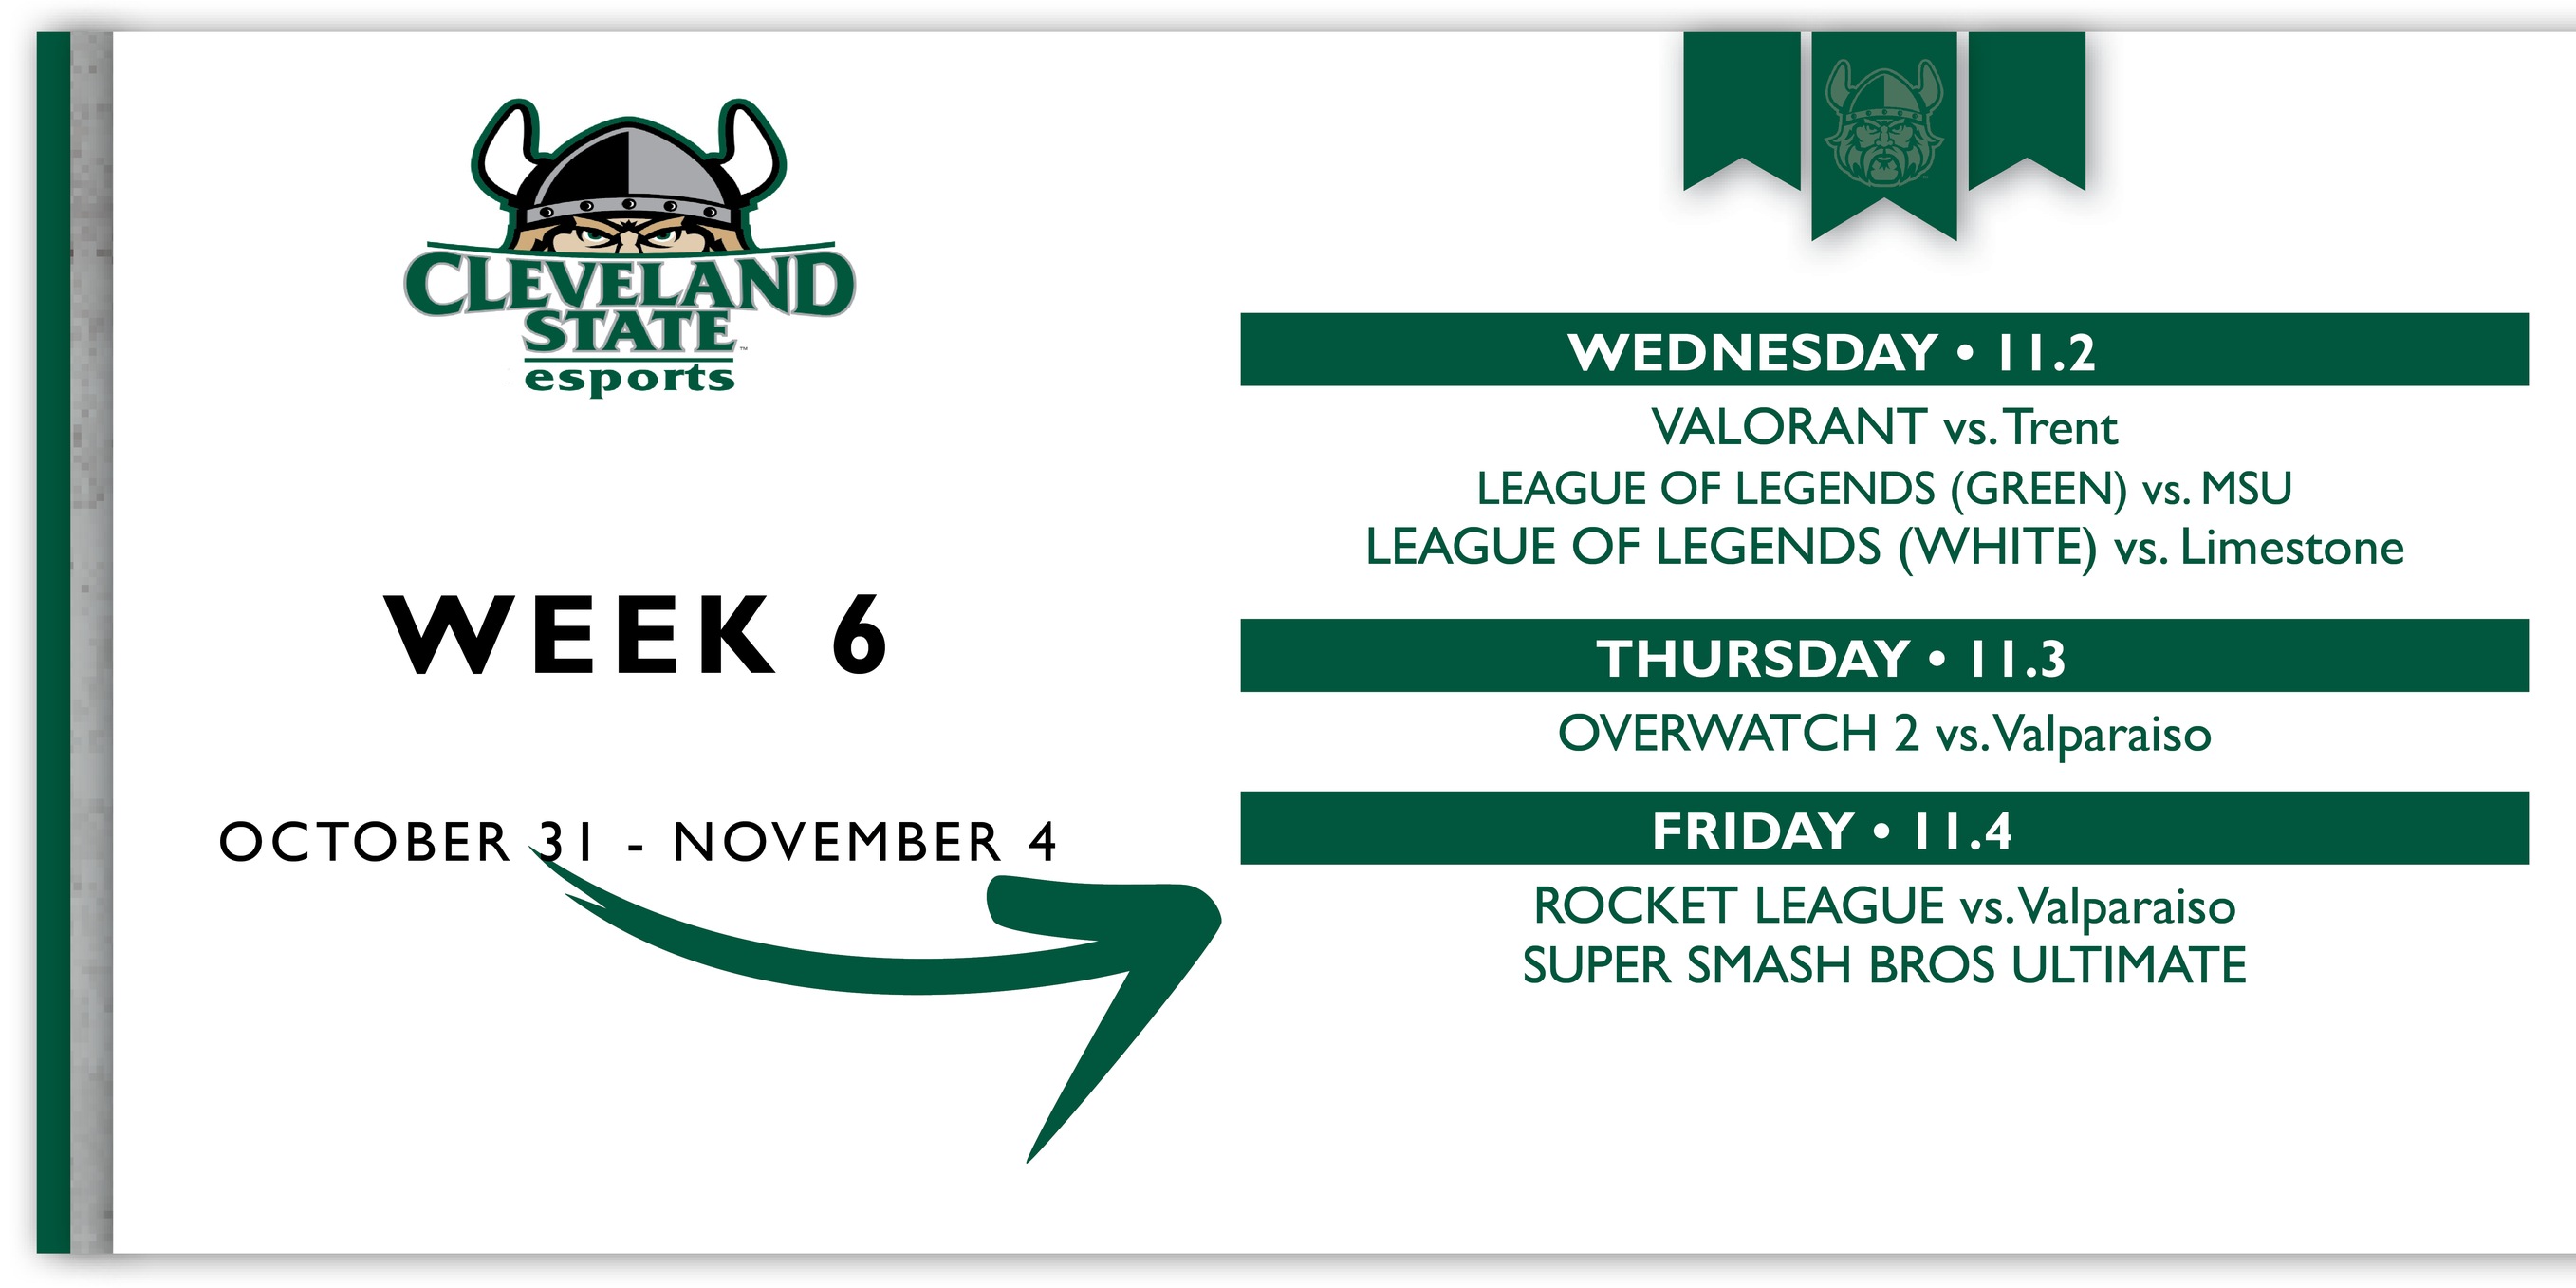 Cleveland State Esports Weekly Update/Preview